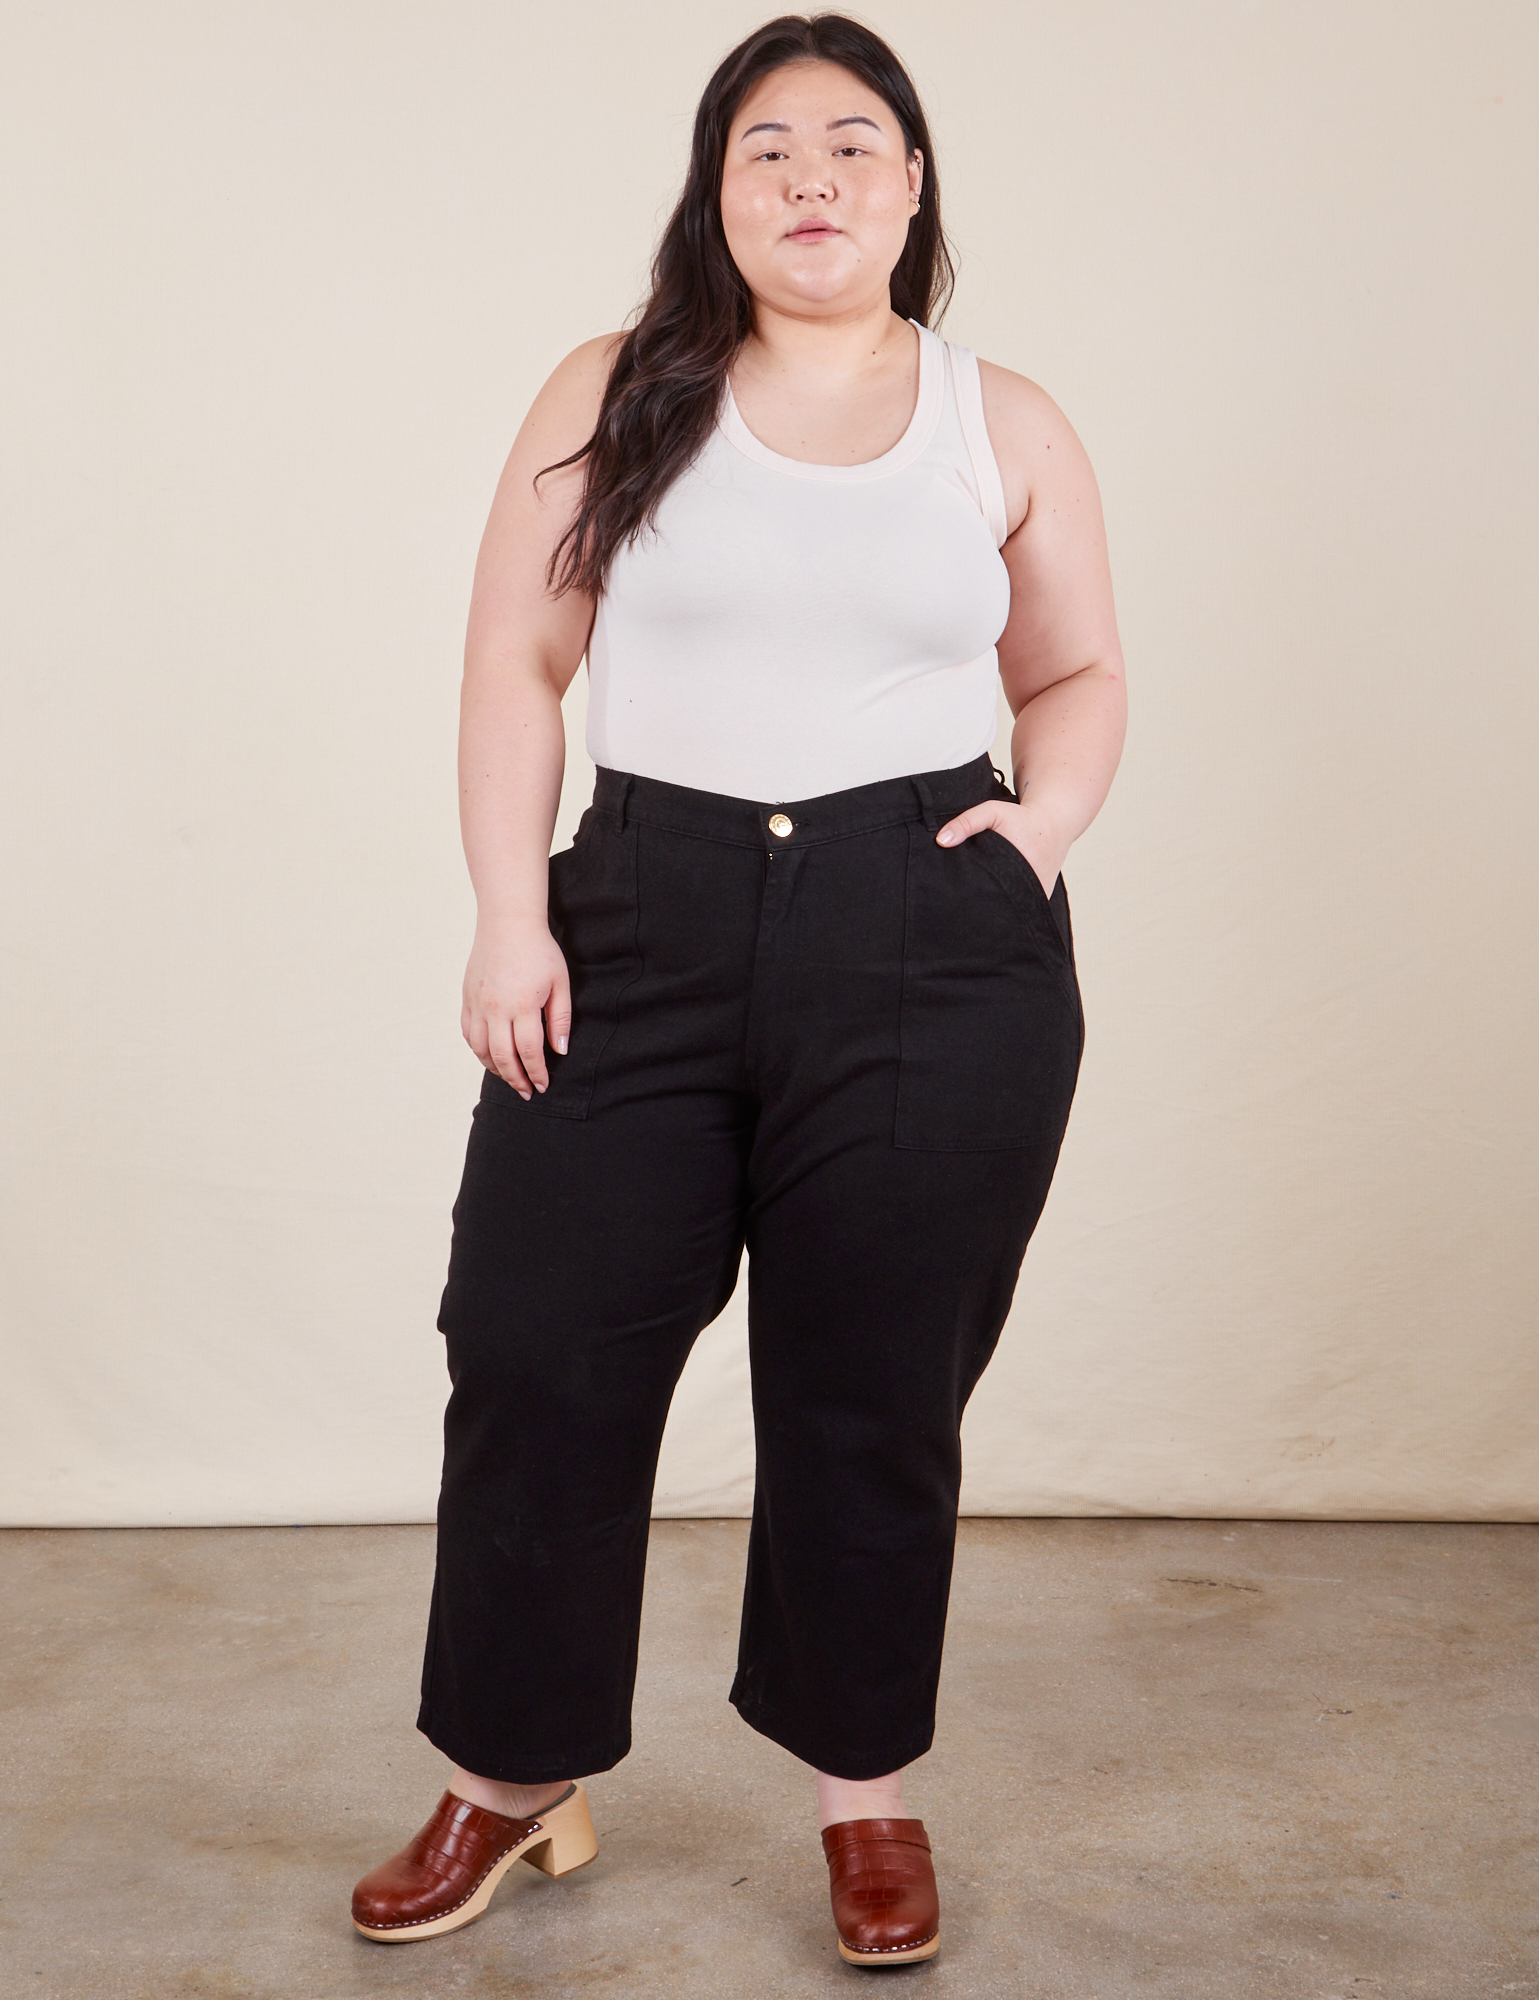 Ashley is 5&#39;7&quot; and wearing Petite 1XL Work Pants in Basic Black paired with vintage off-white tank